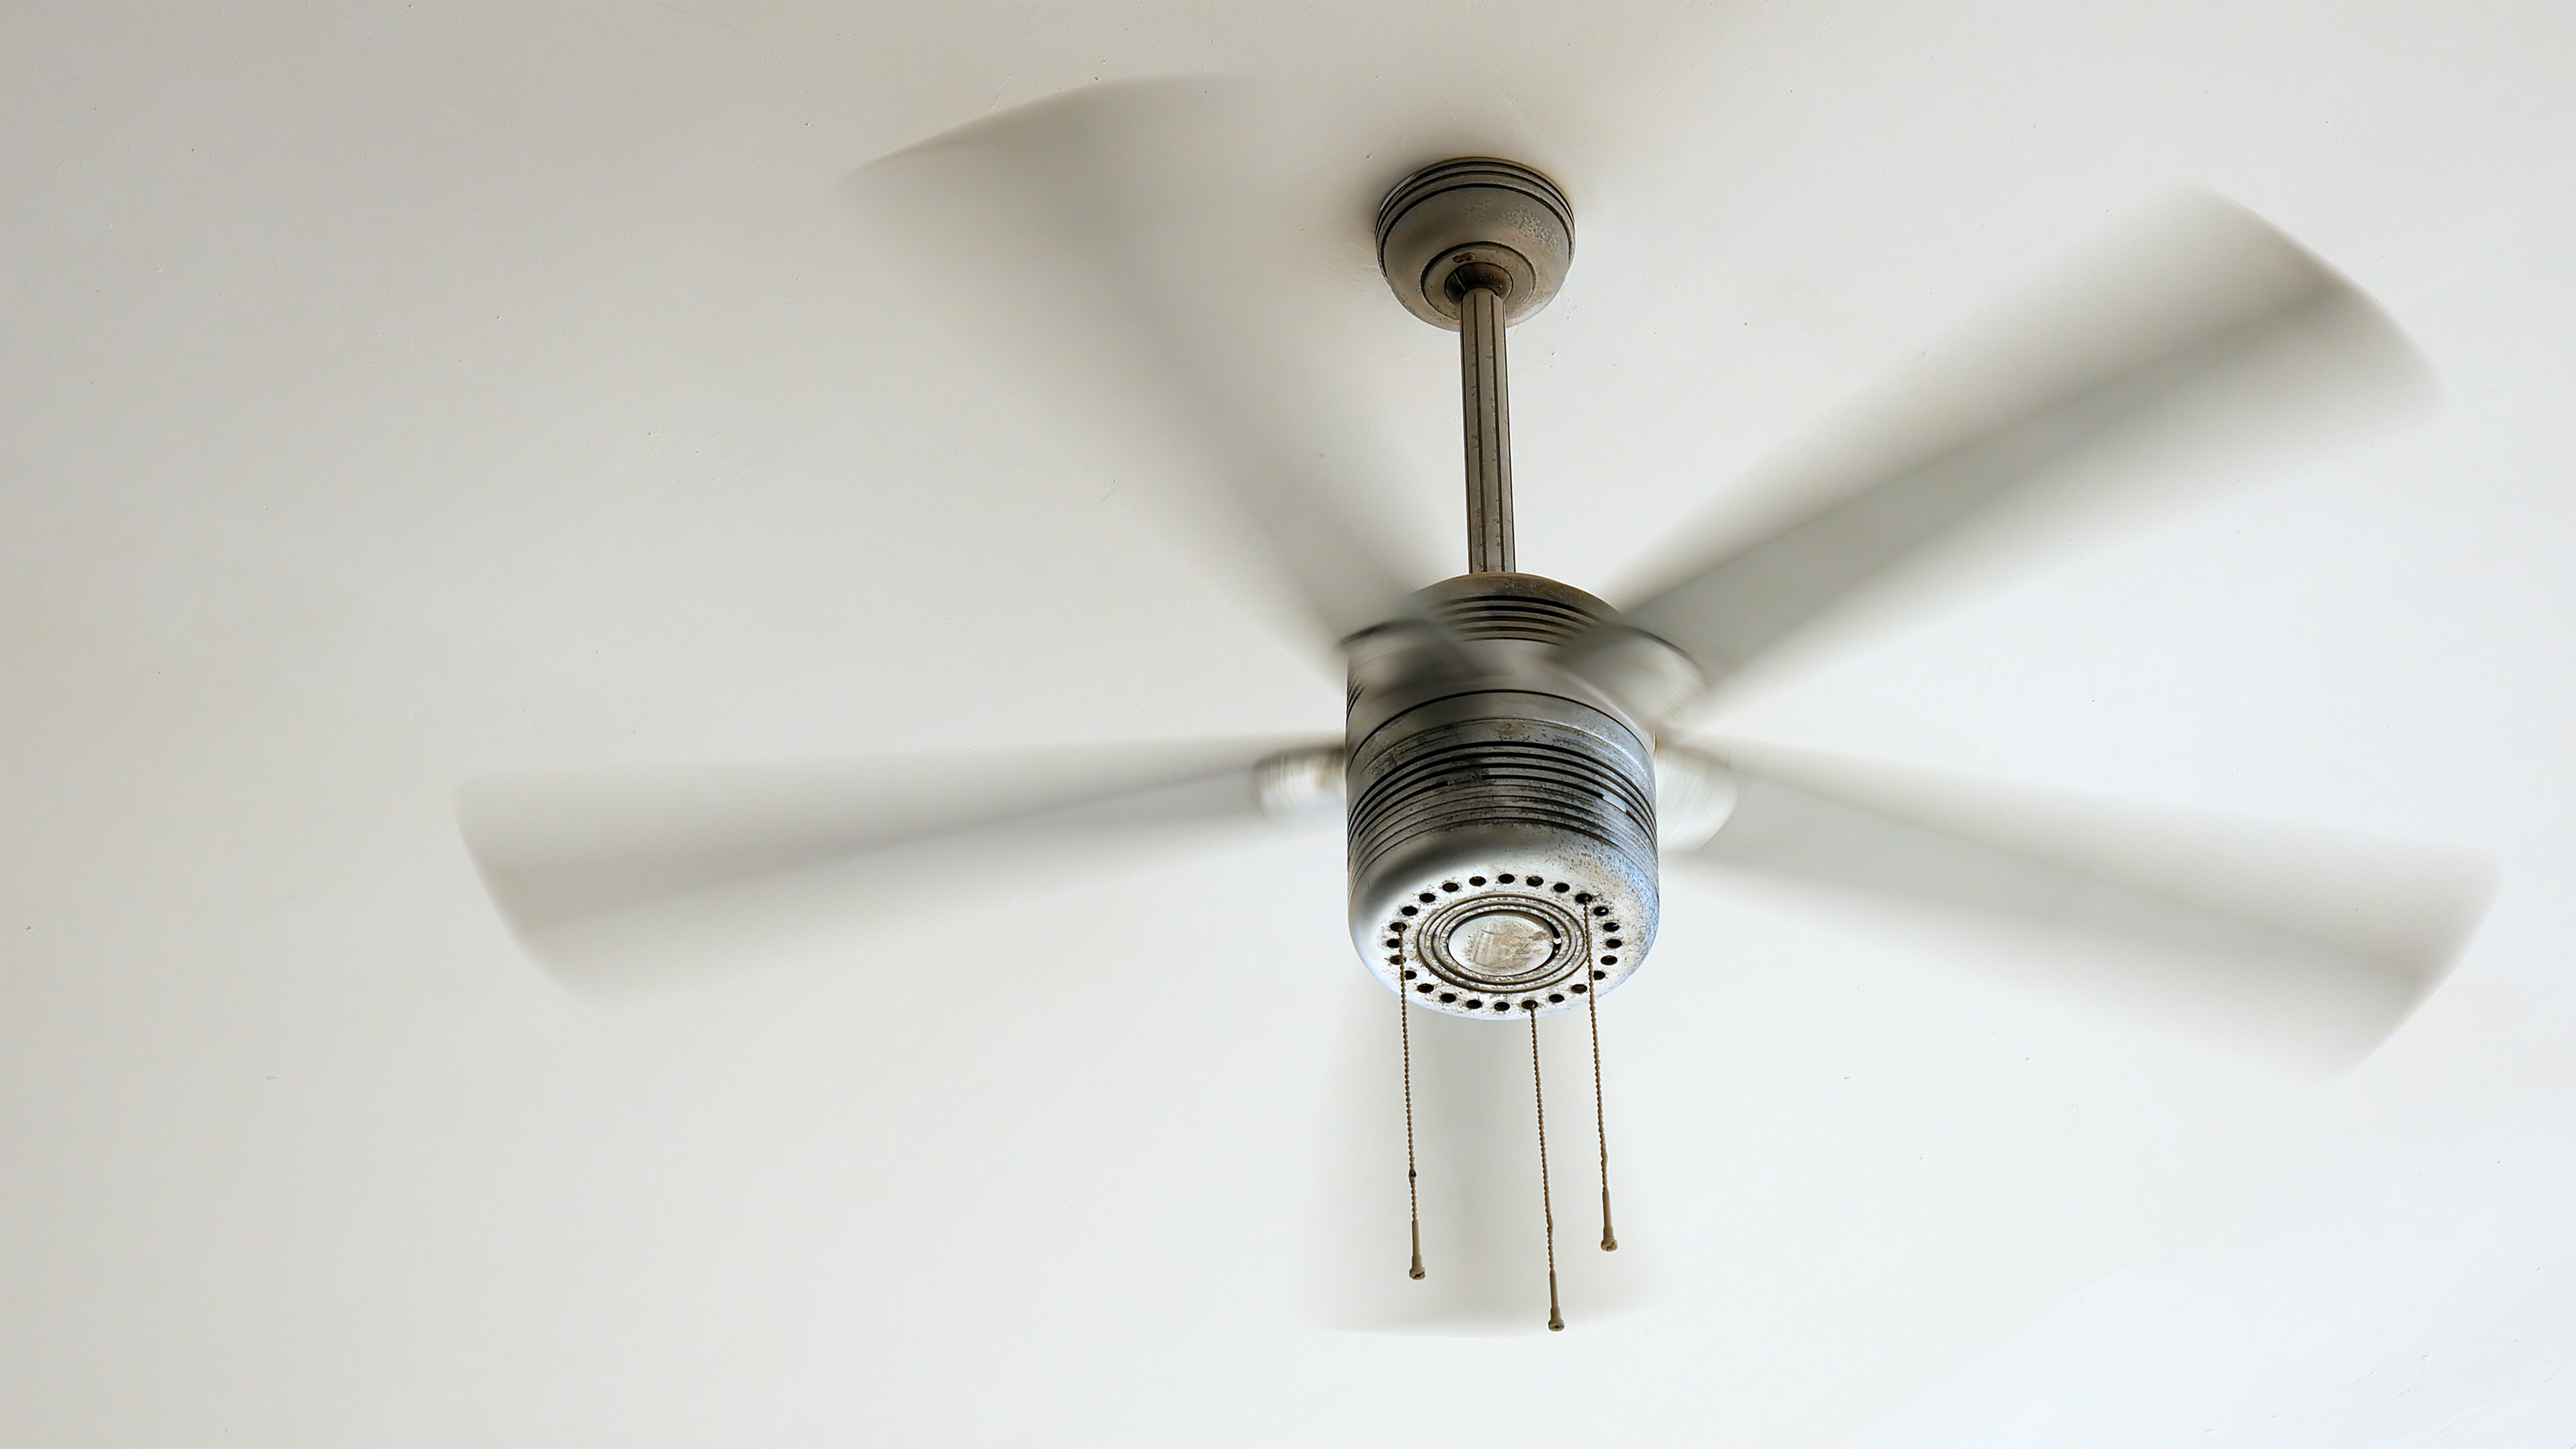 Choosing the Perfect Summer Fan: Which Way Fan Direction for Maximum Comfort and Energy Efficiency